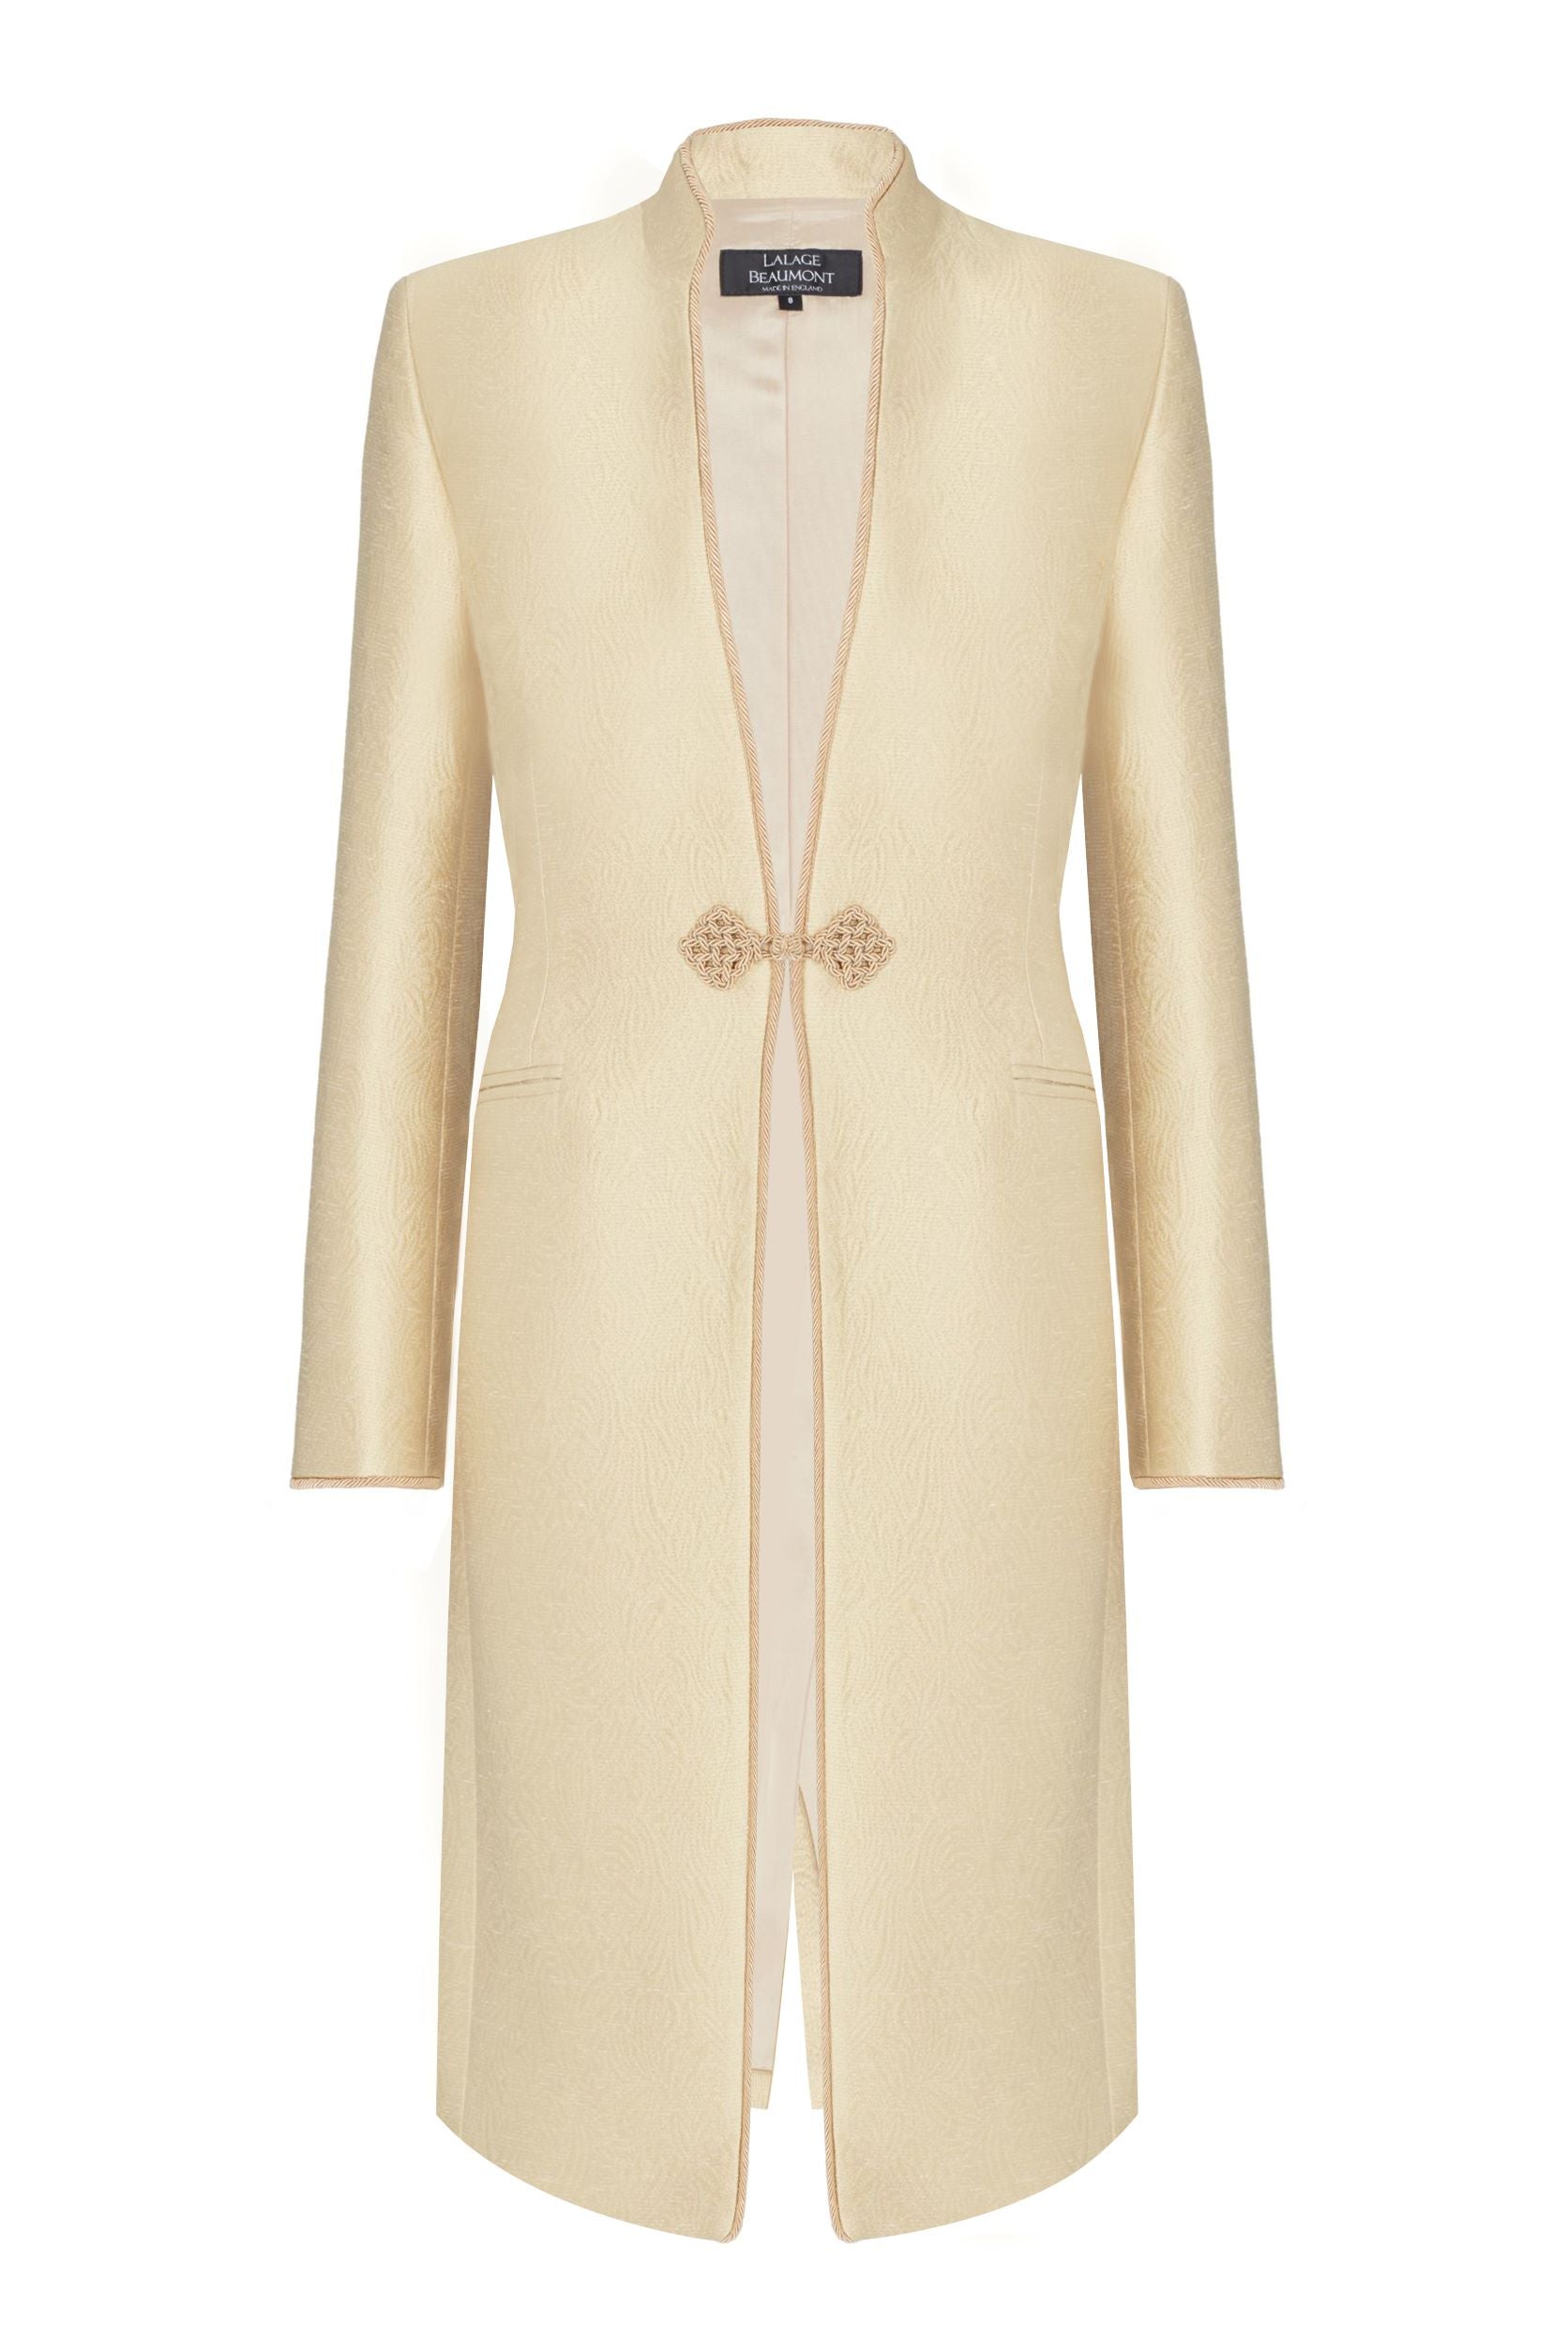 Vicky Gold Dress Coat | Lalage Beaumont